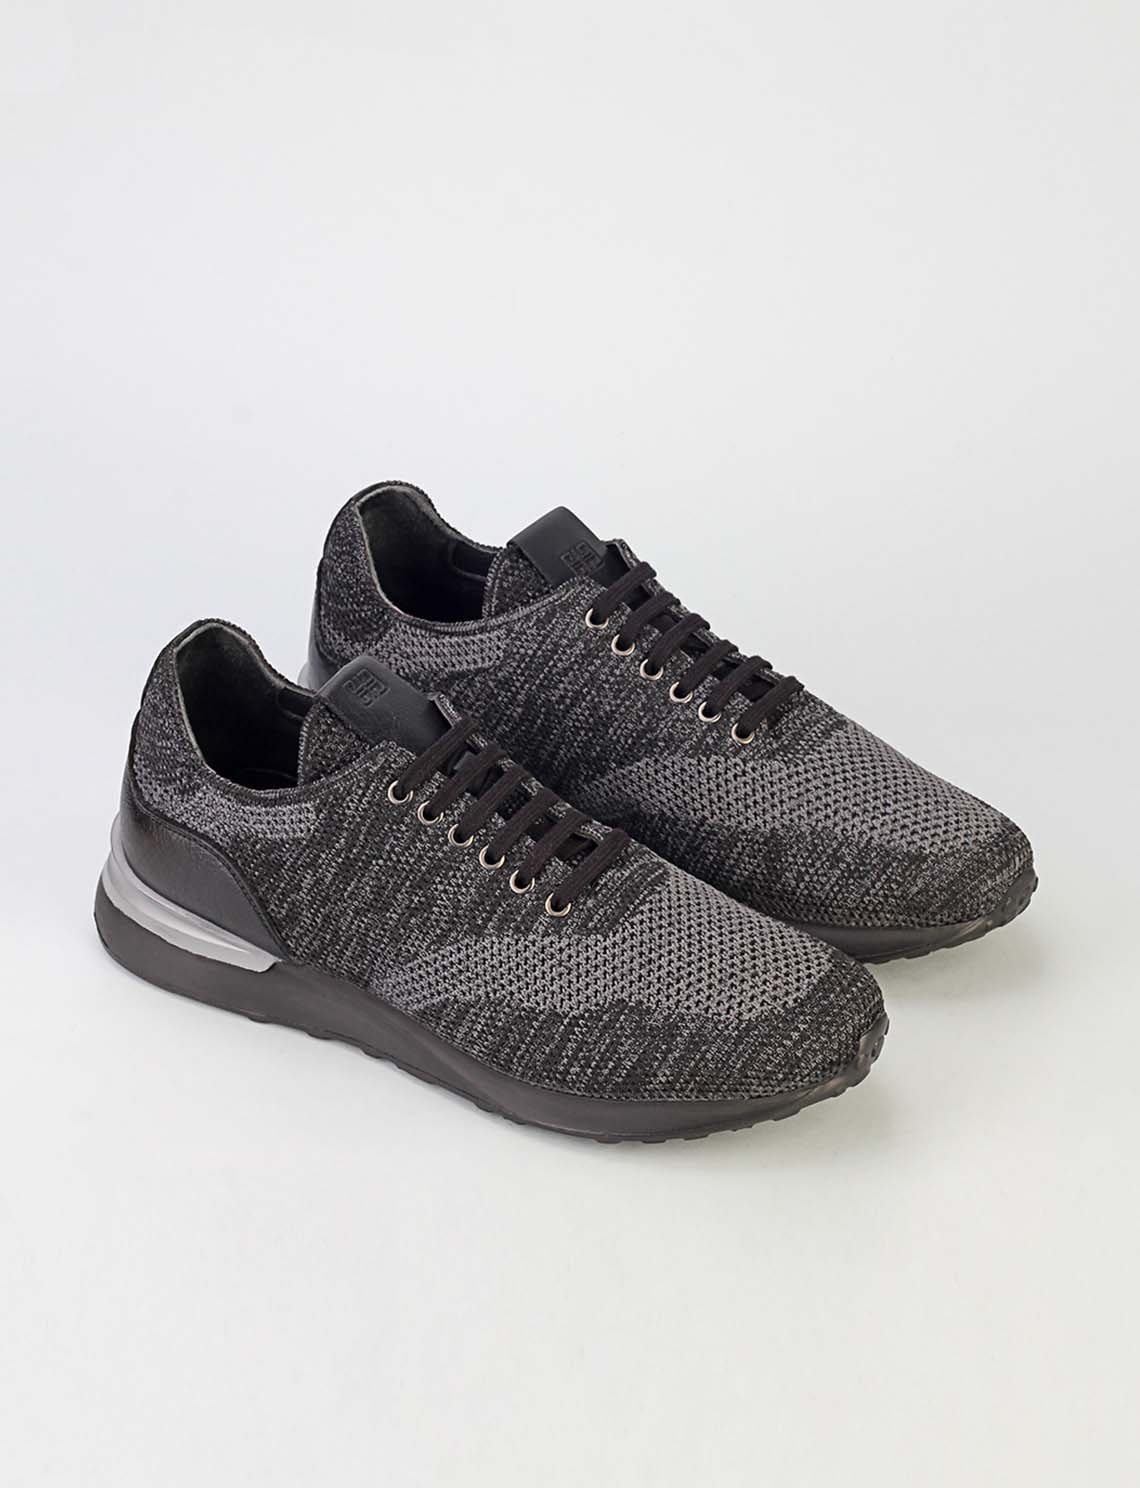 Men Dark Gray Lace Up Knit Sneakers